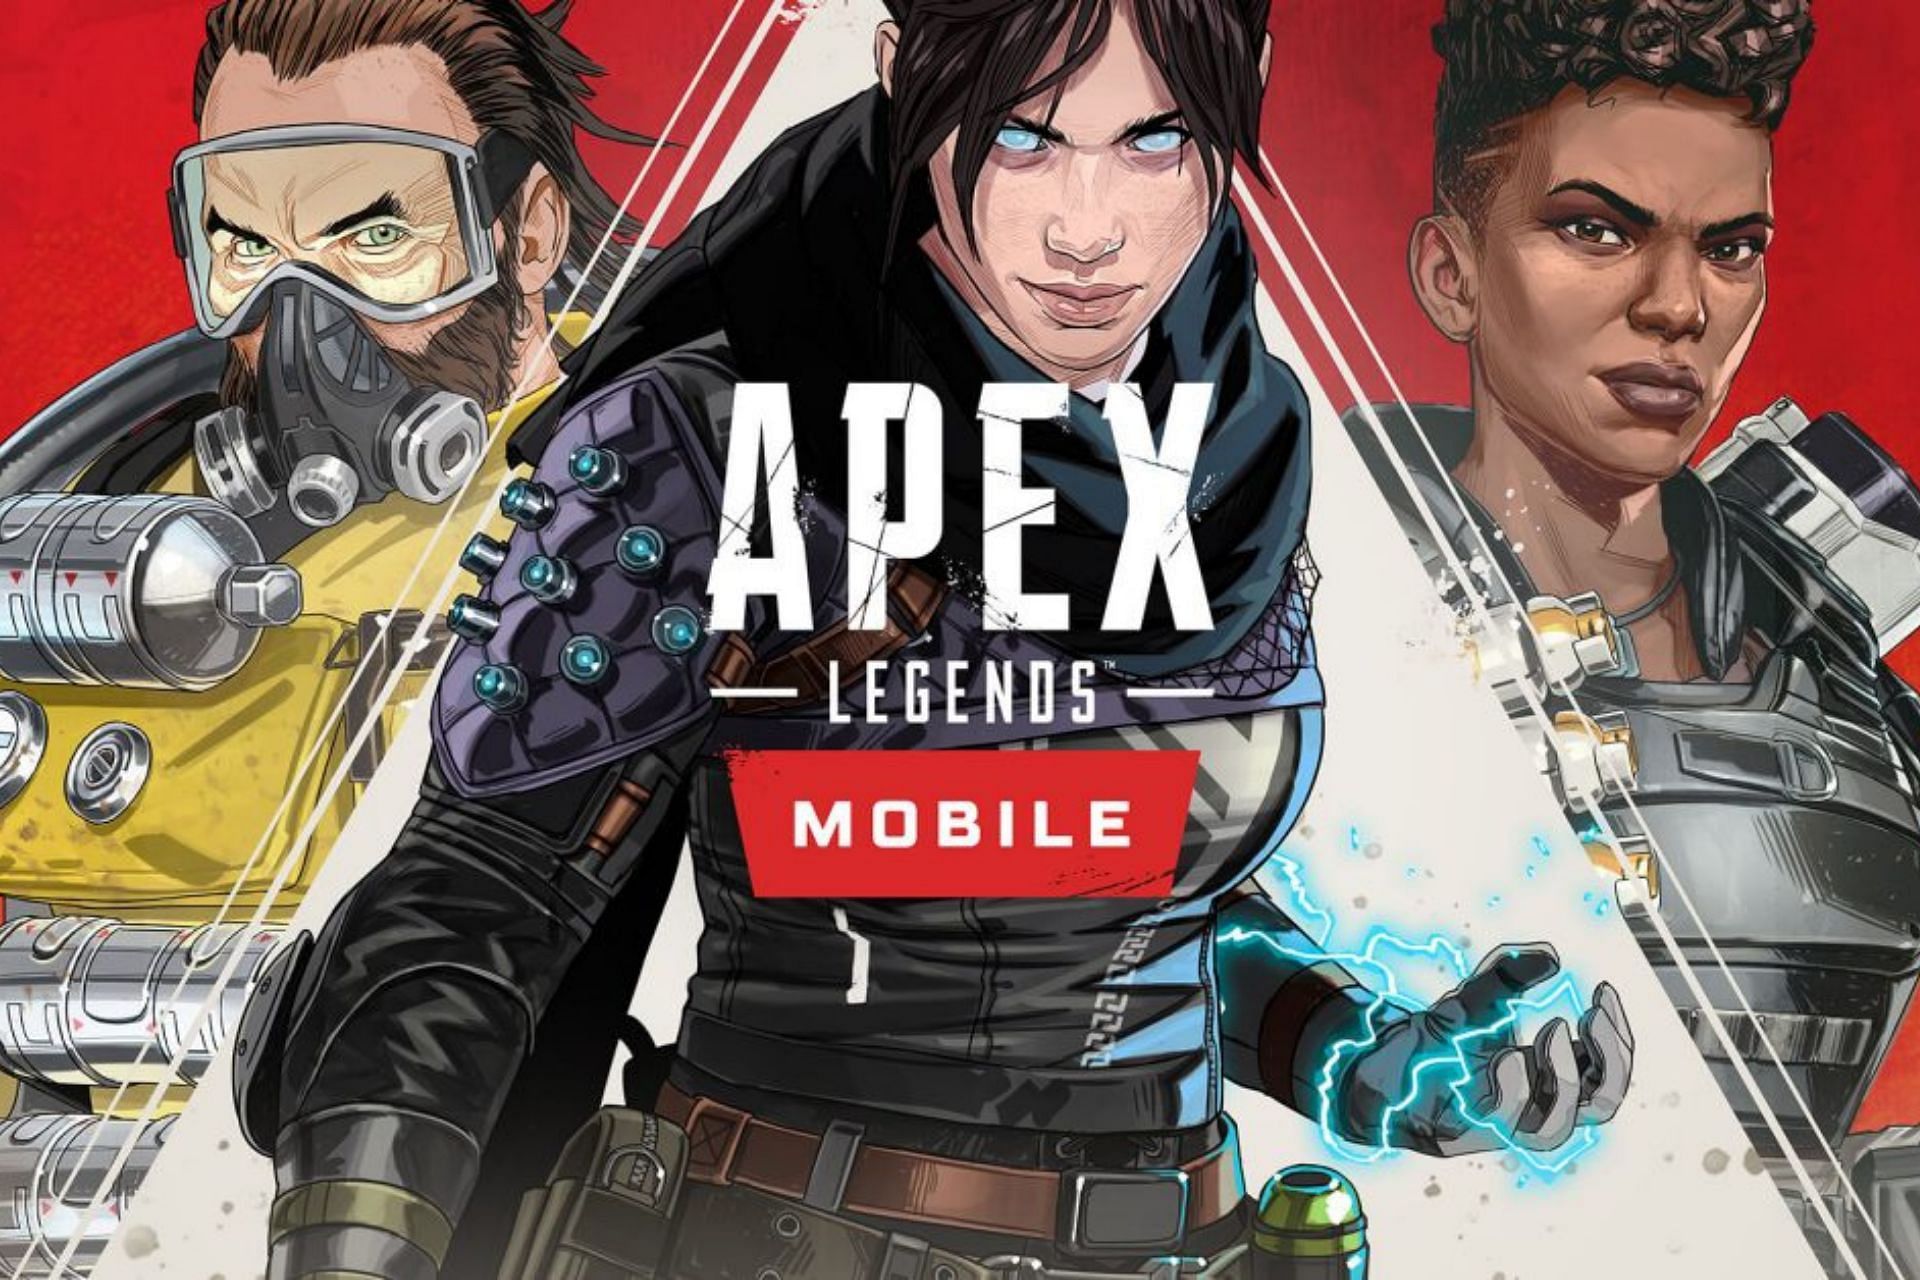 Players waiting for the Apex Legends Mobile soft launch yesterday were disappointed after Respawn Entertainment failed to drop the game (Image via Electronic Arts)